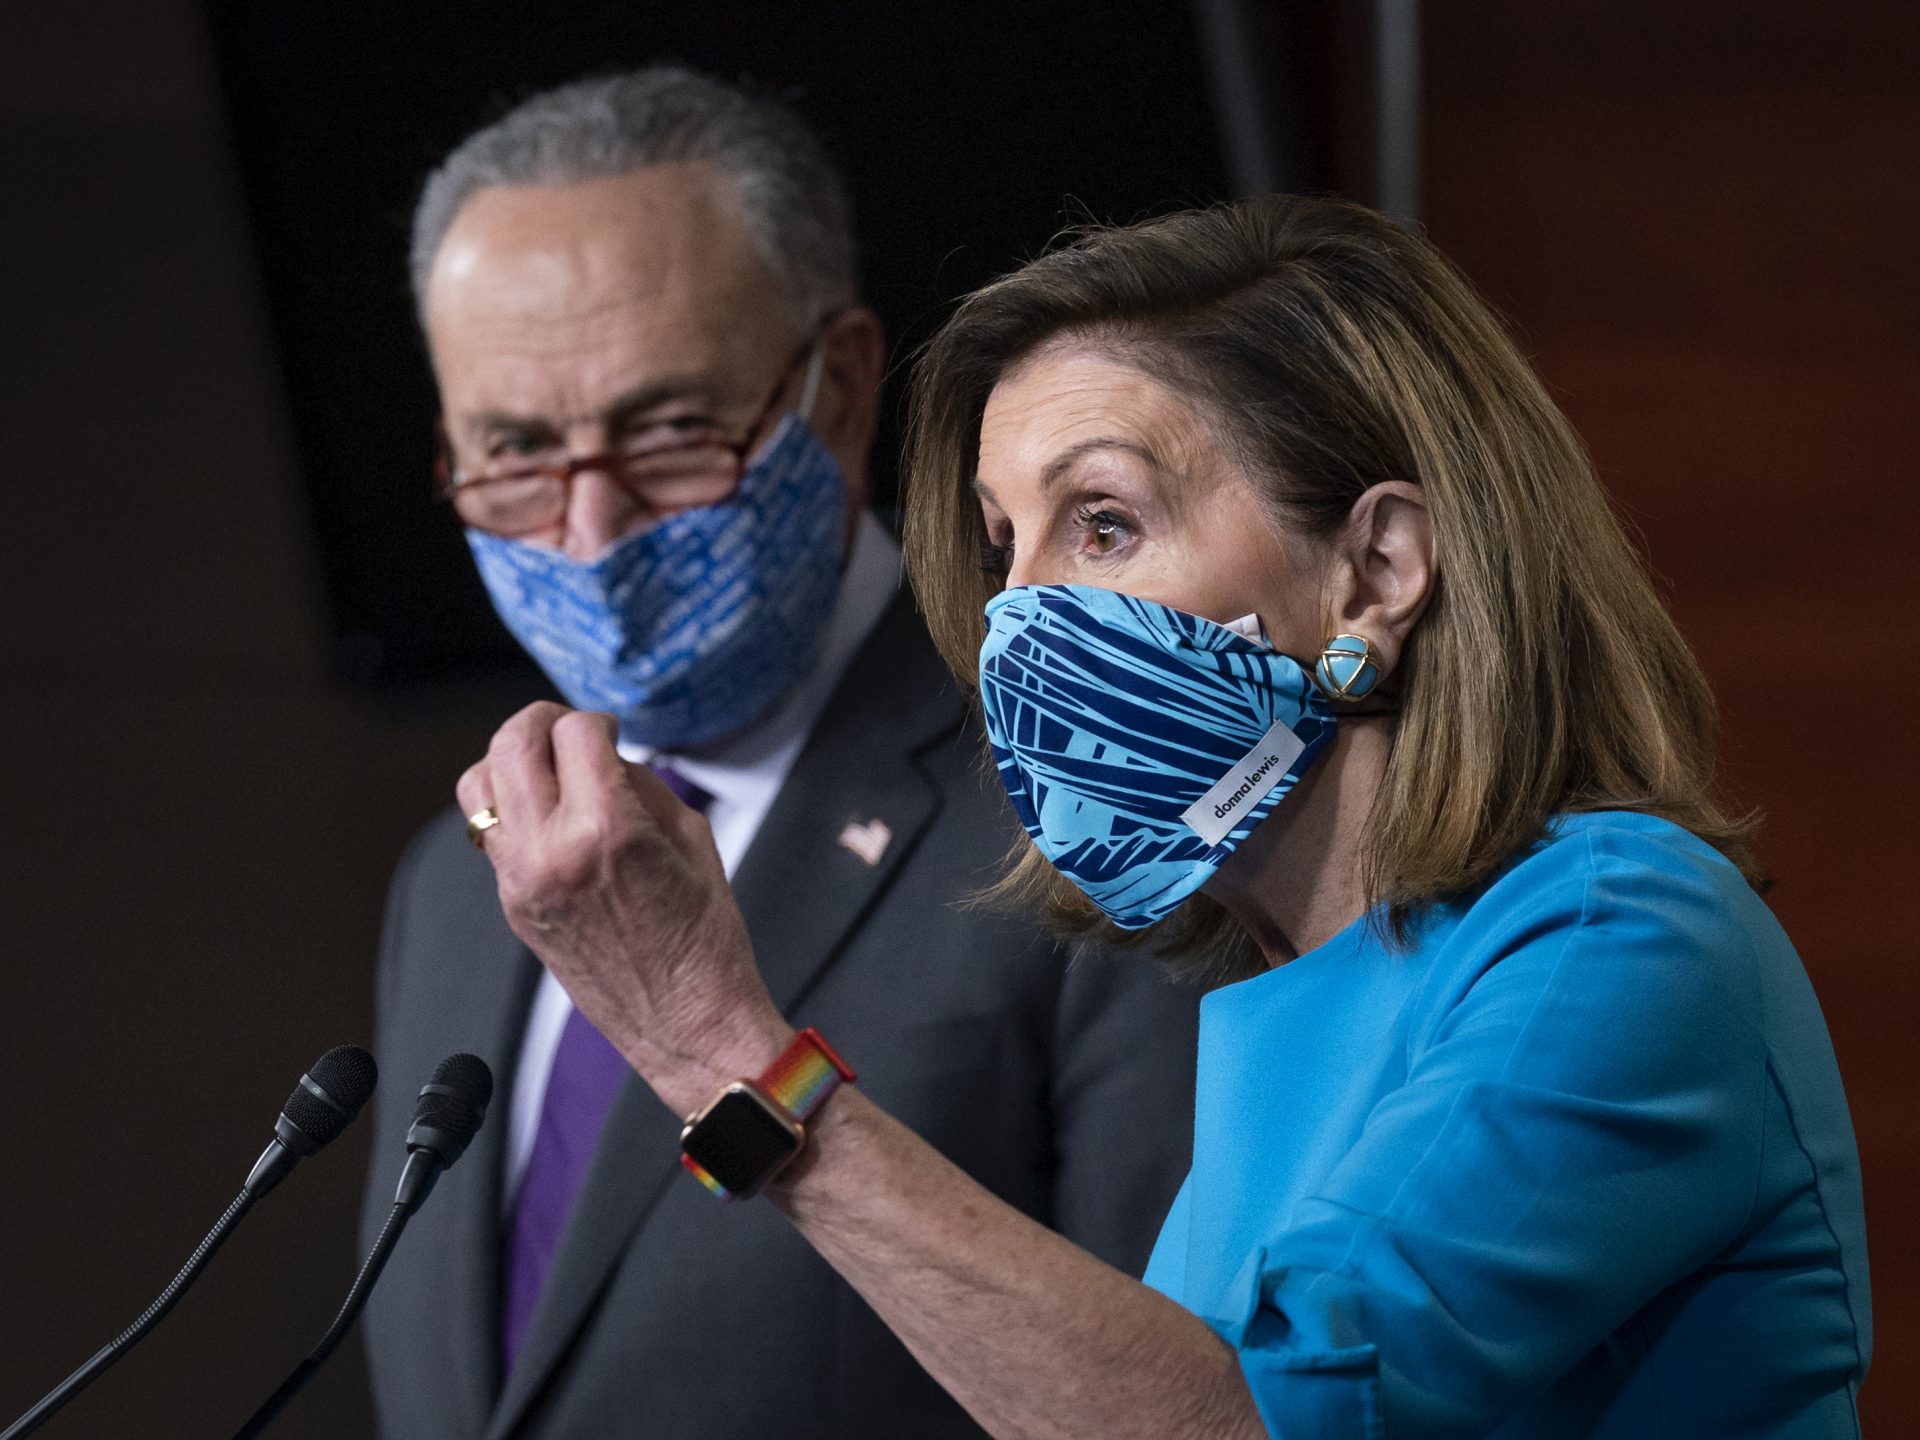 House Speaker Nancy Pelosi, D-Calif., and Senate Minority Leader Chuck Schumer, D-N.Y., are breaking from their demand for more than $2 trillion in coronavirus relief spending to move toward a compromise.